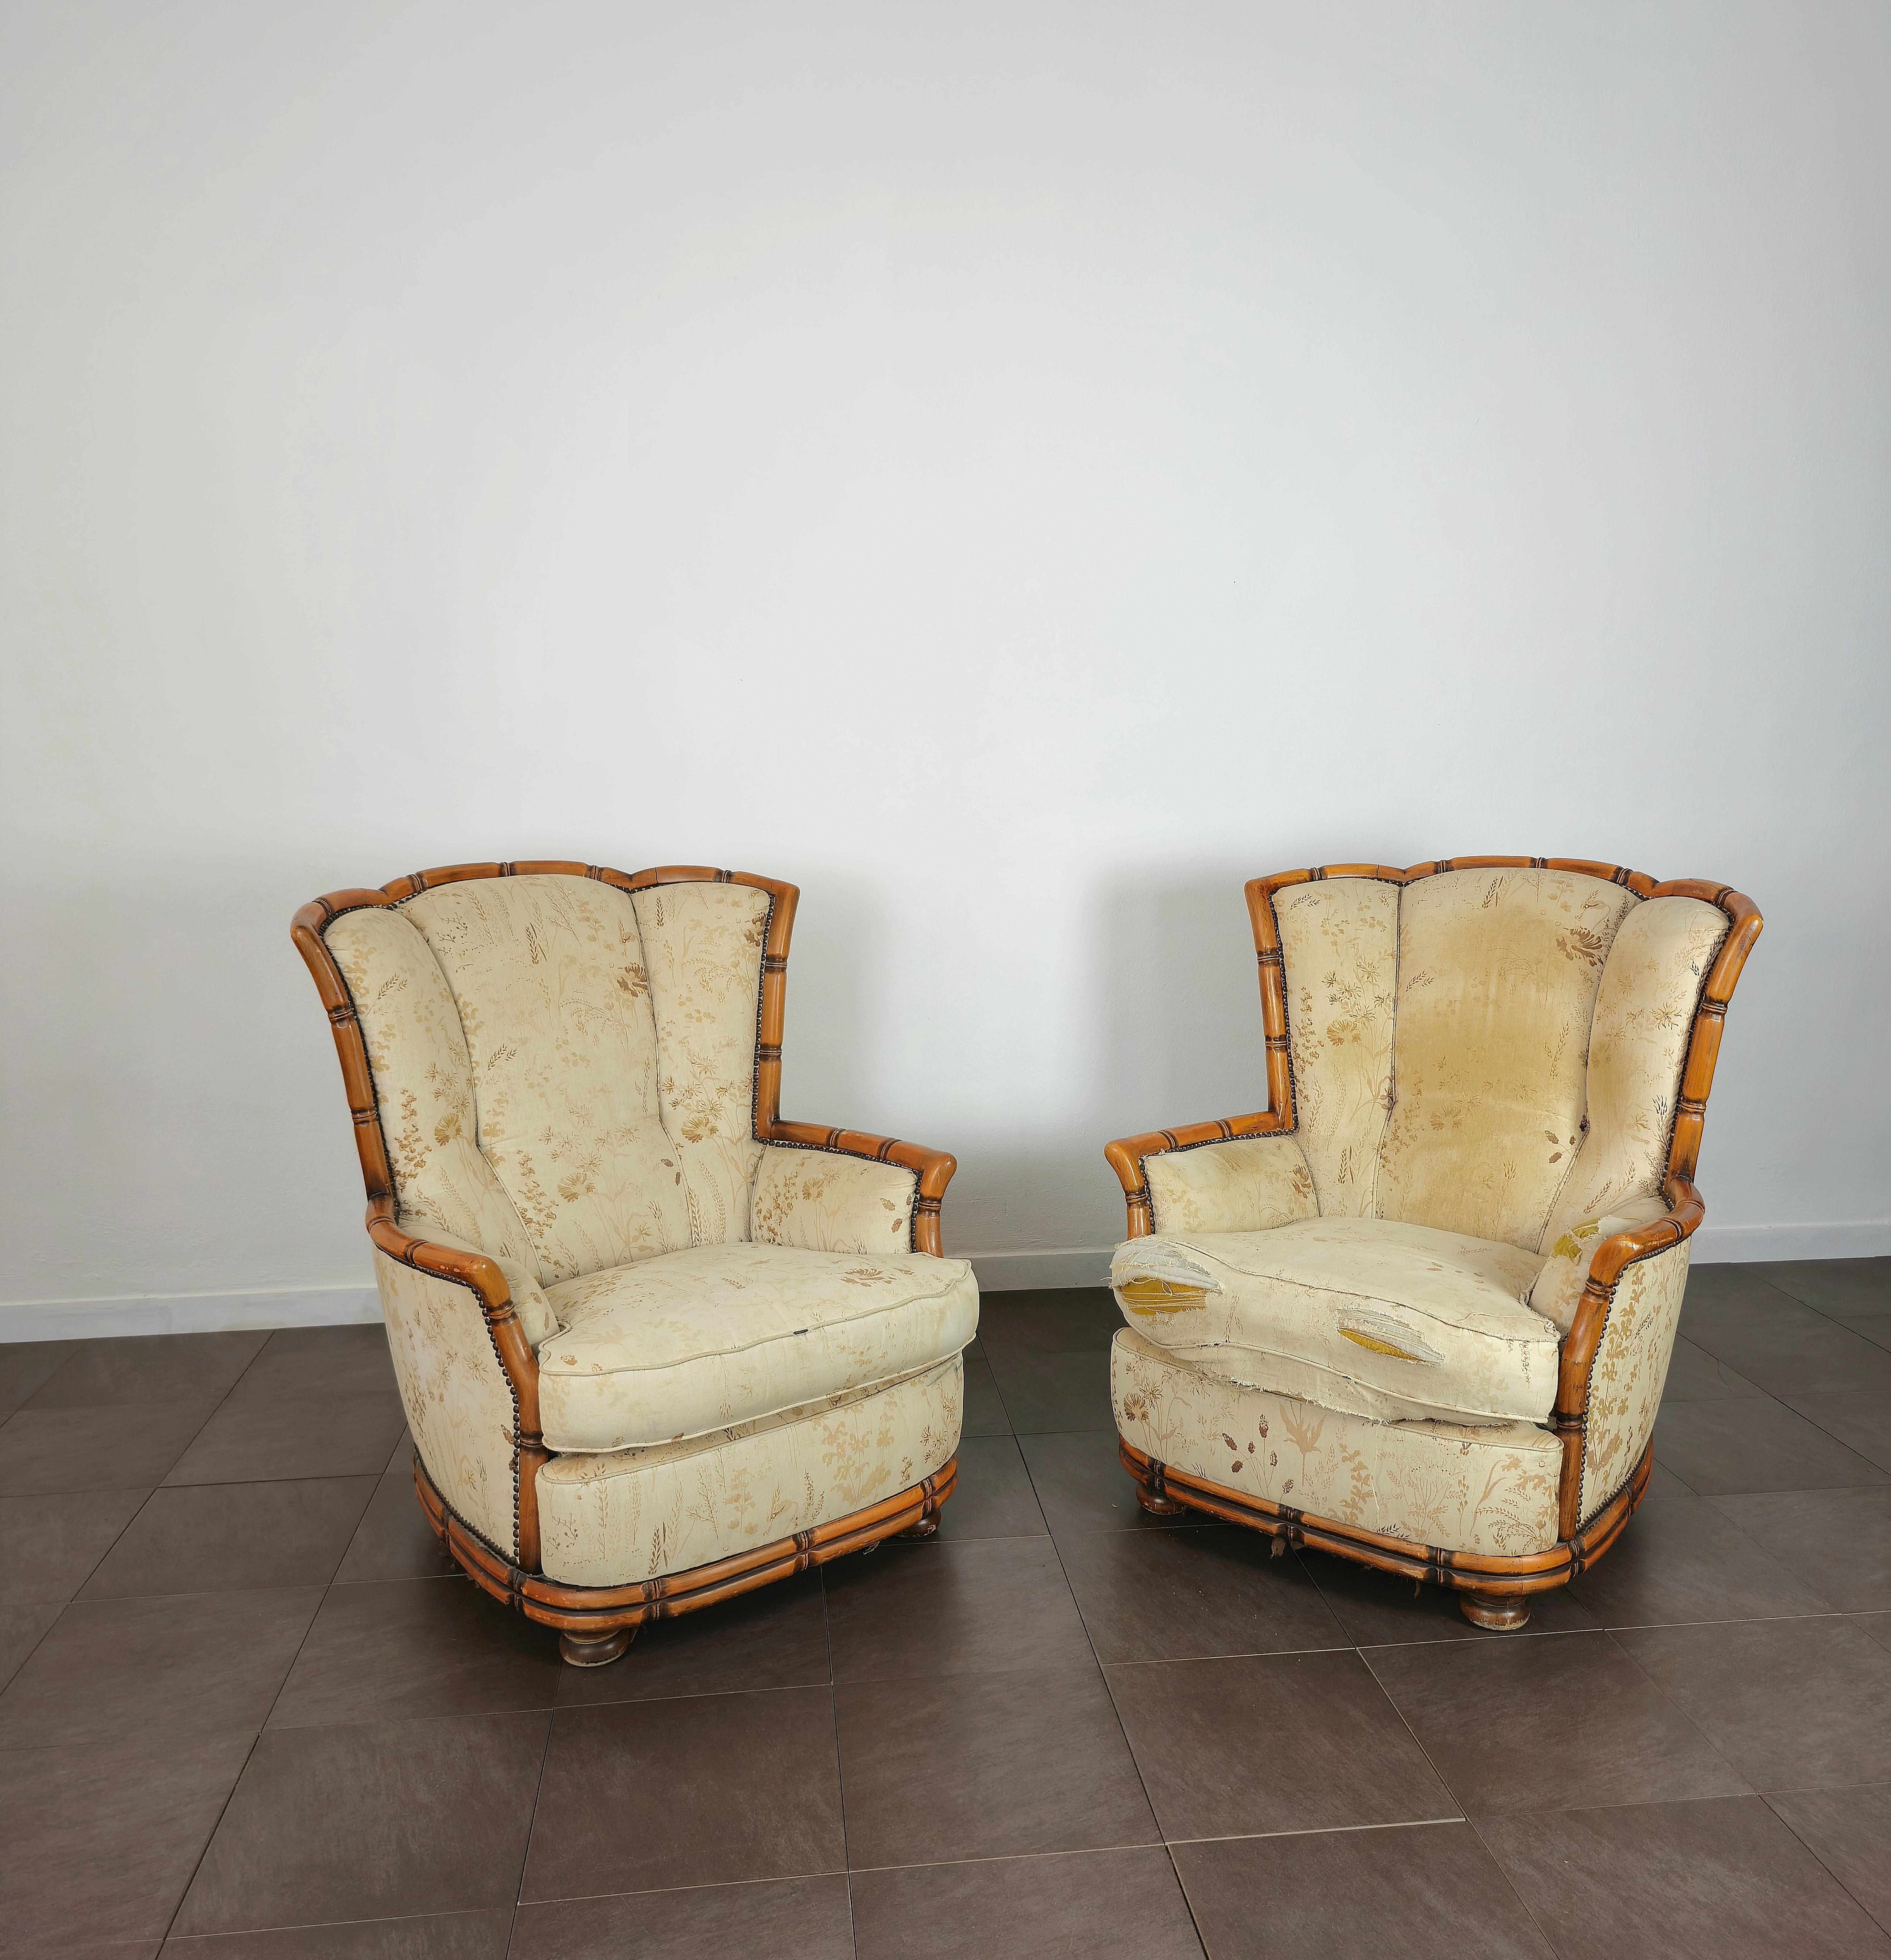 Pair of Armchairs Wood Fabric Giorgetti Midcentury Modern Italian Design 1960s For Sale 2